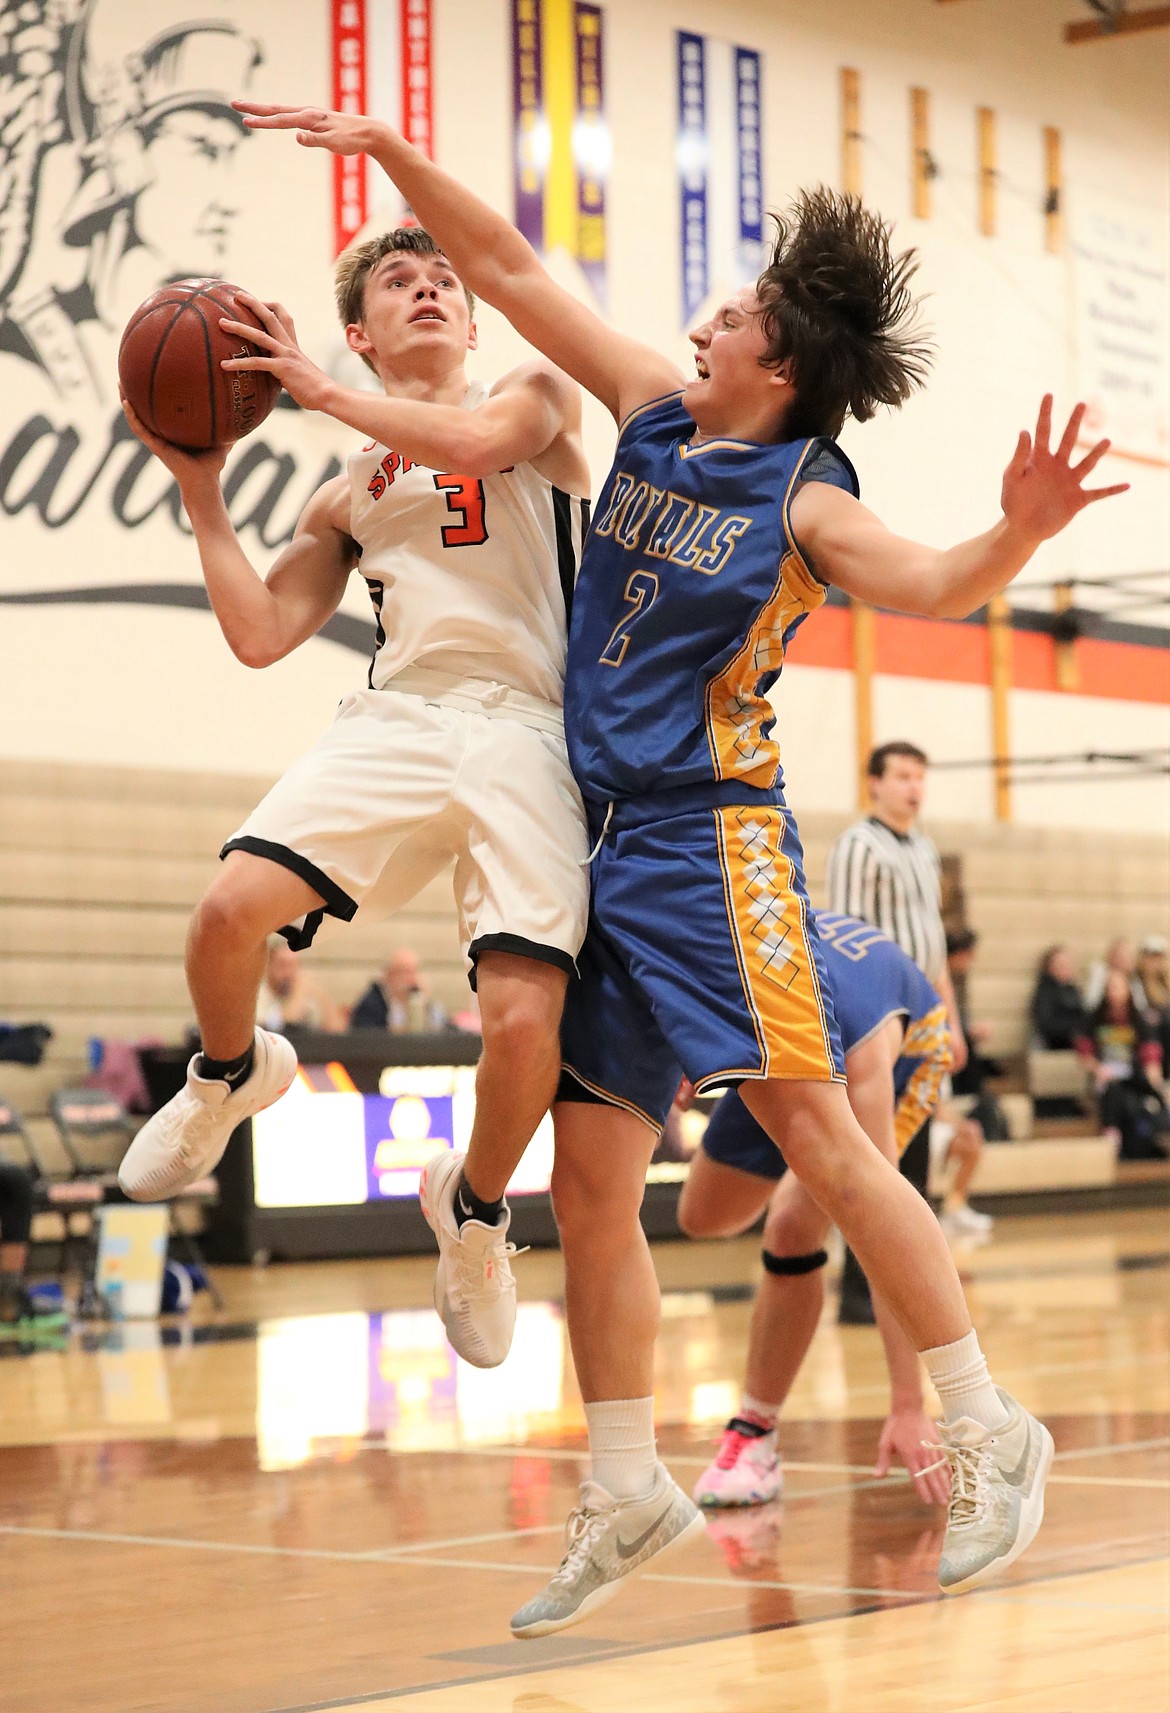 Priest River junior Jordan Nortz attempts to hit a contested shot over a North Idaho Christian defender on Monday, Jan. 4 at PRLHS.